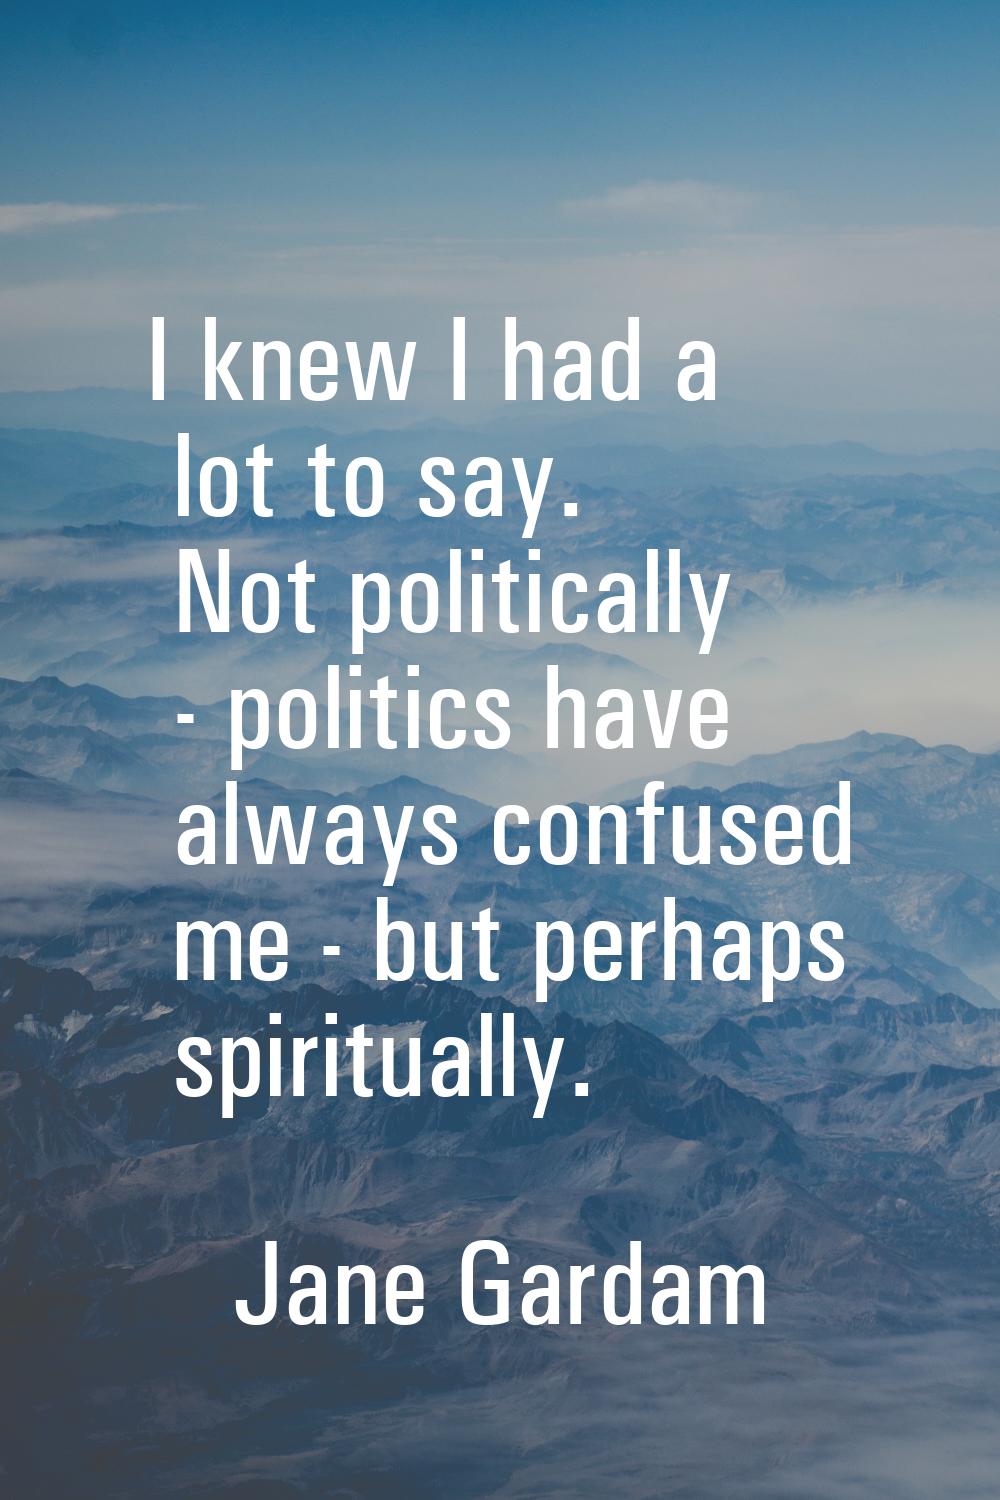 I knew I had a lot to say. Not politically - politics have always confused me - but perhaps spiritu